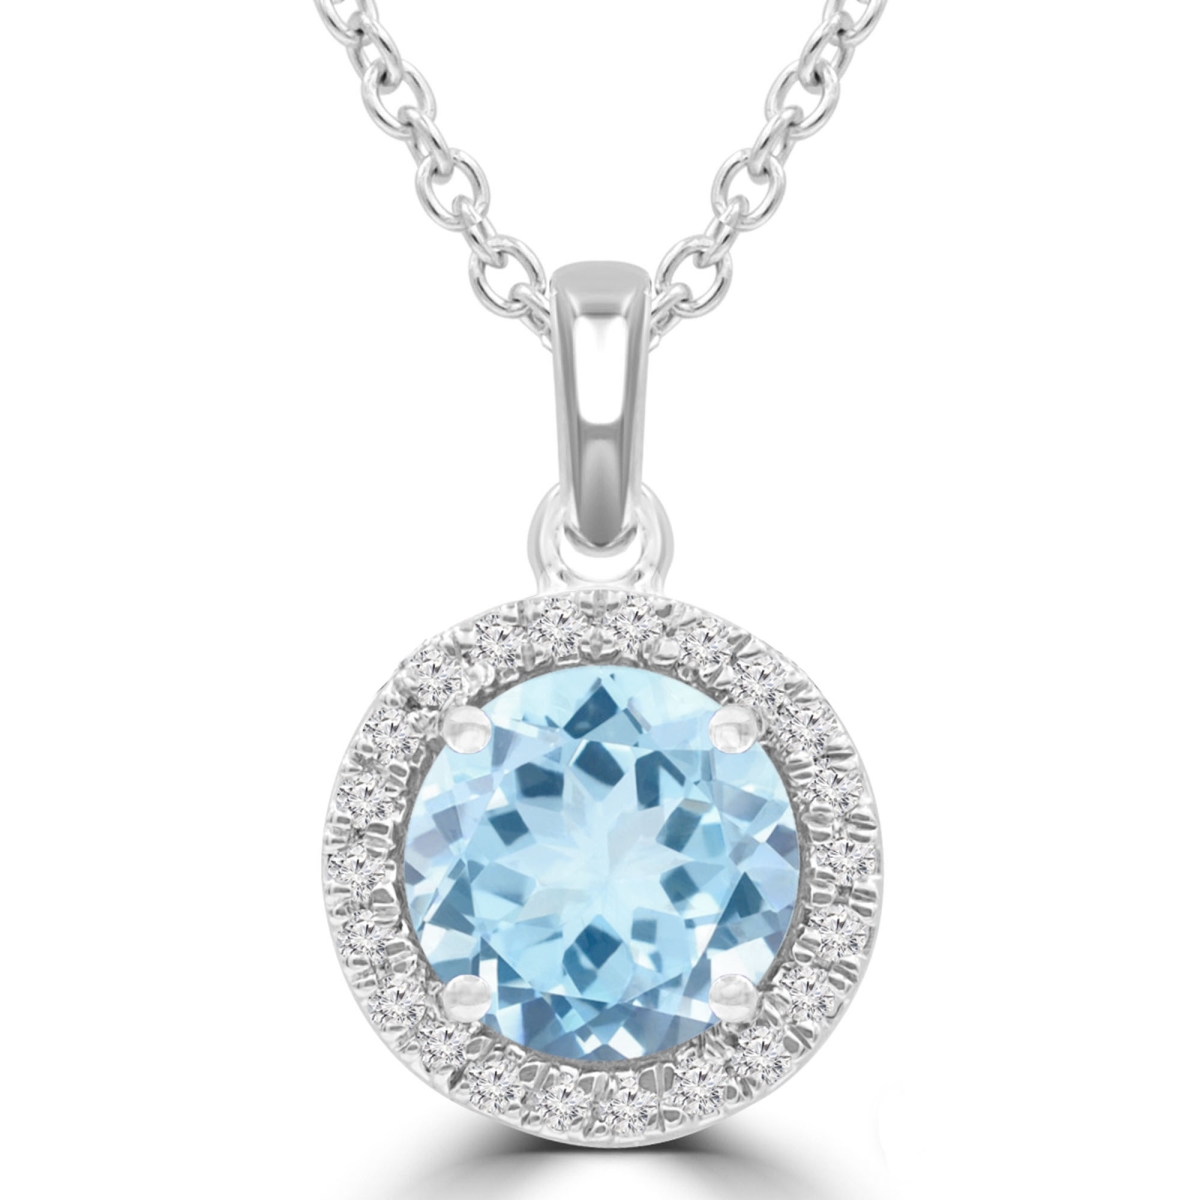 Picture of Majesty Diamonds MDR220197 1.13 CTW Round Blue Topaz Halo Pendant Necklace in 14K White Gold